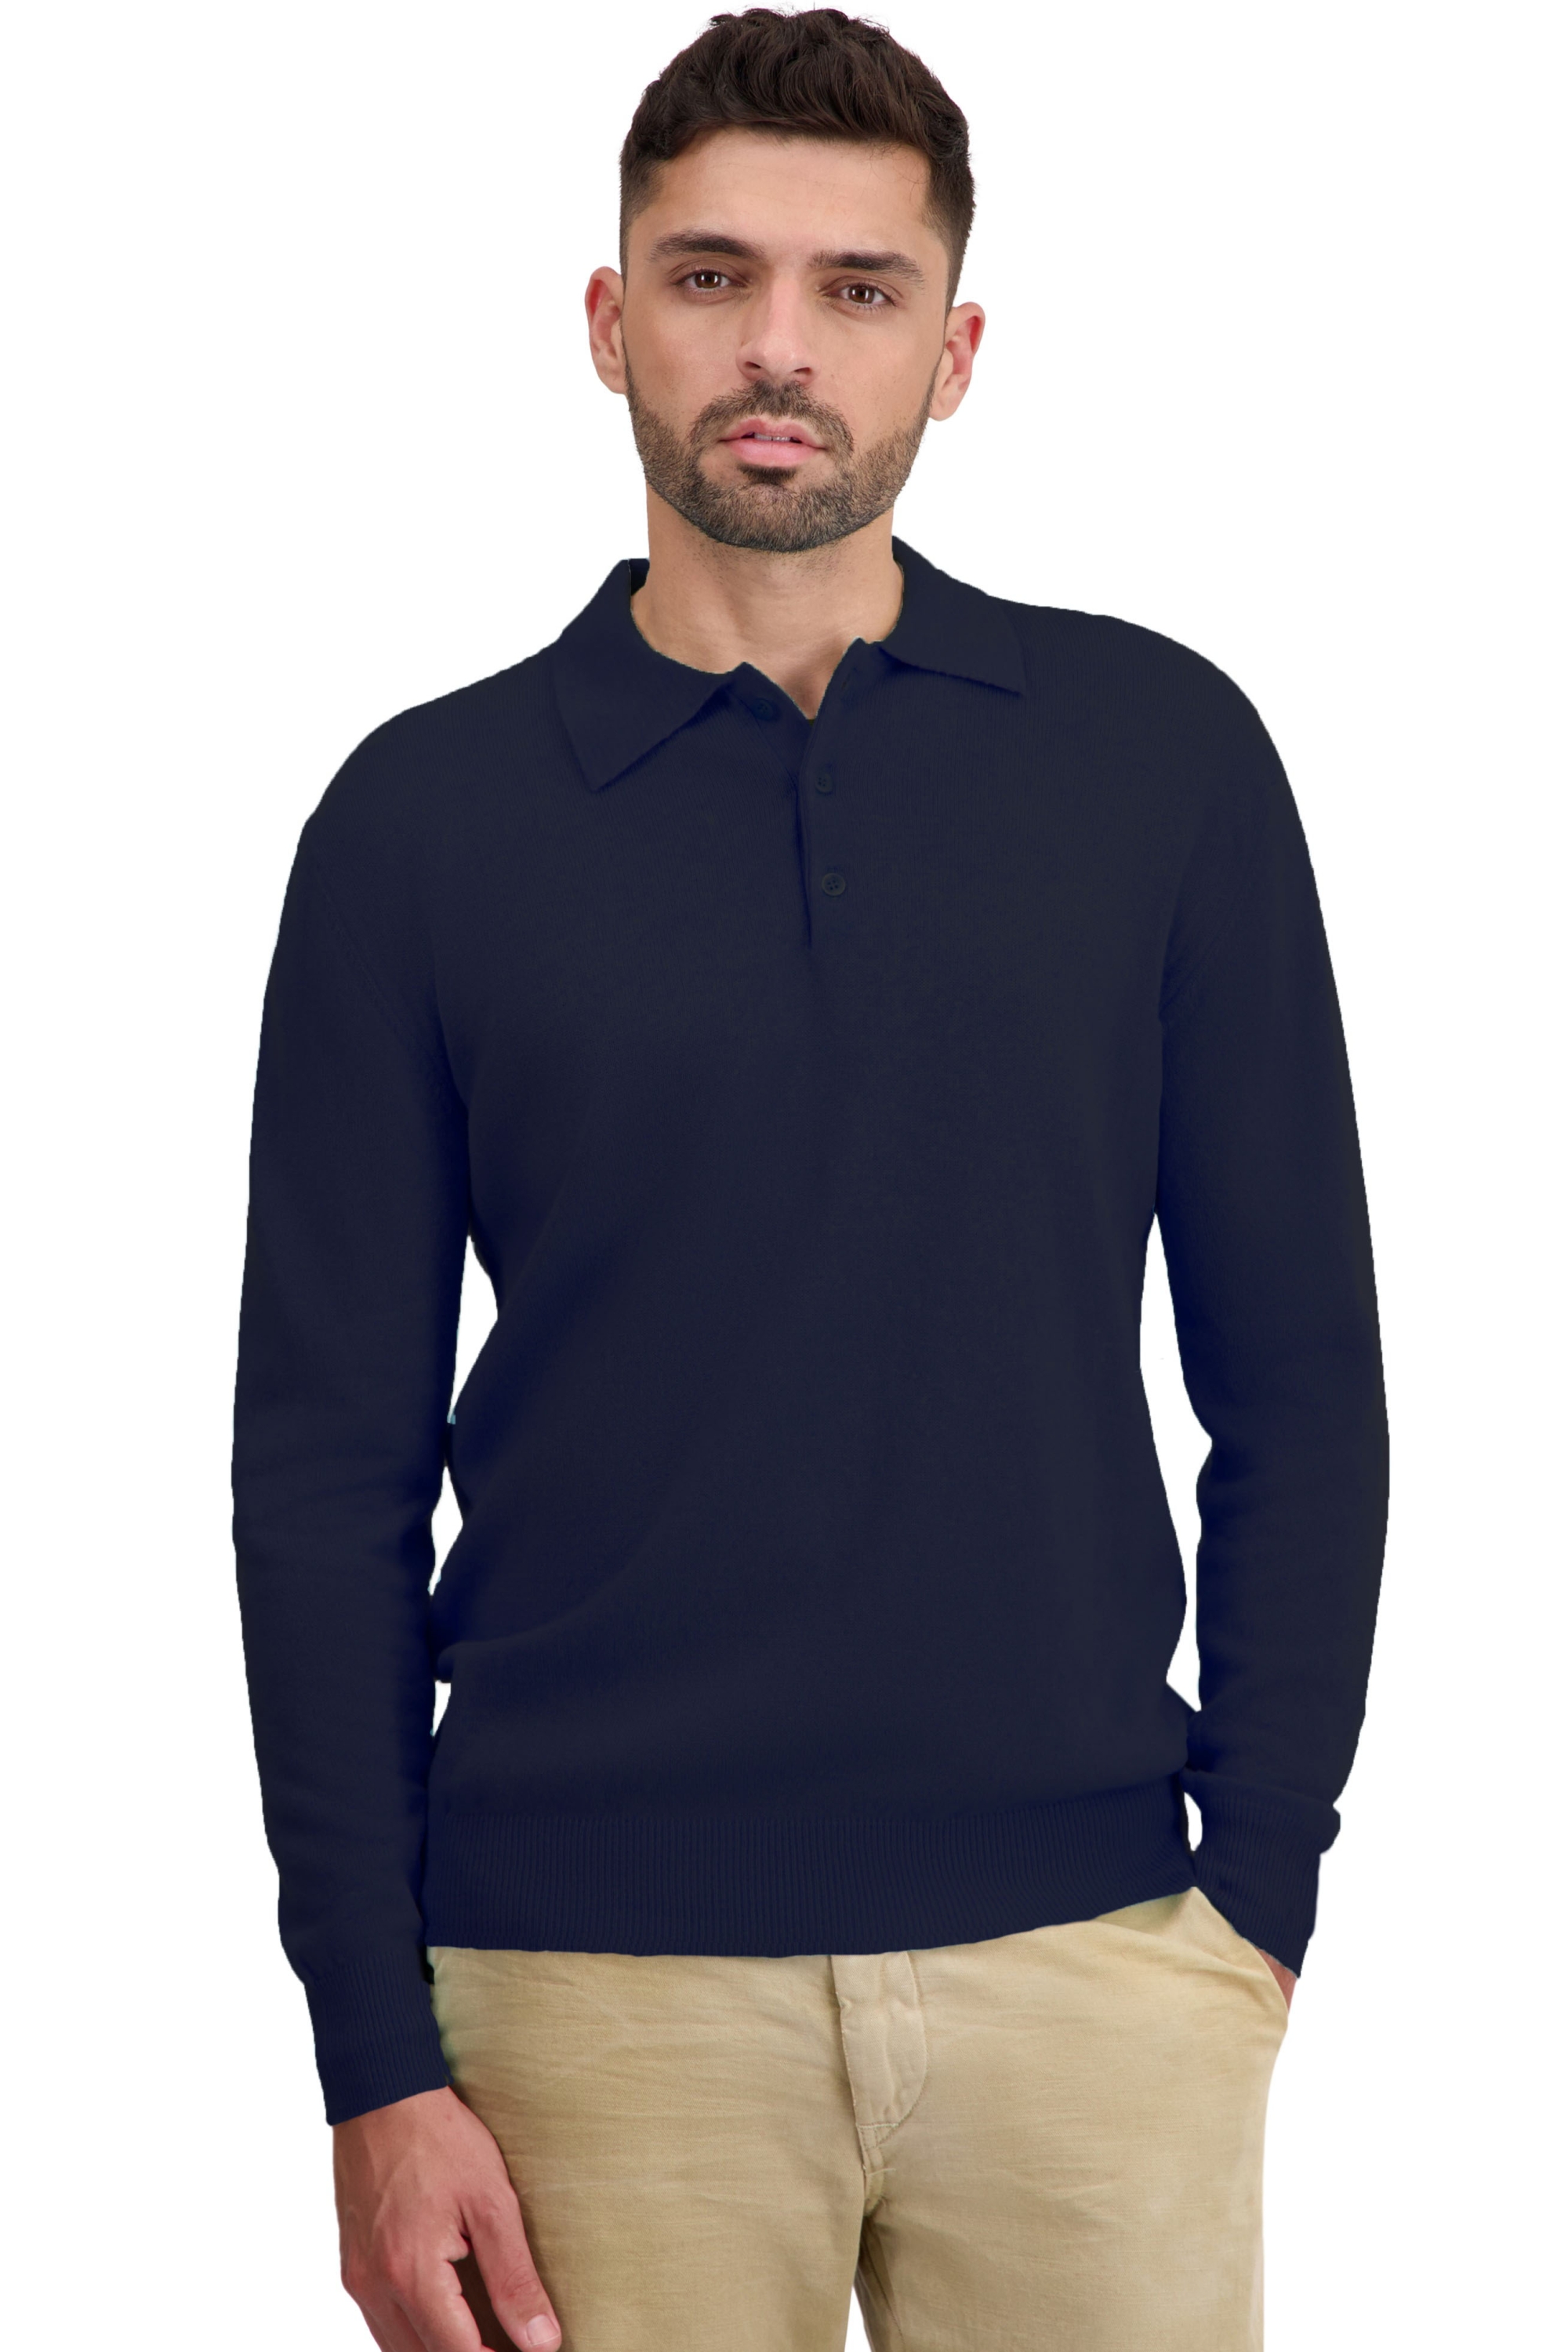 Cashmere men basic sweaters at low prices tarn first dress blue xl